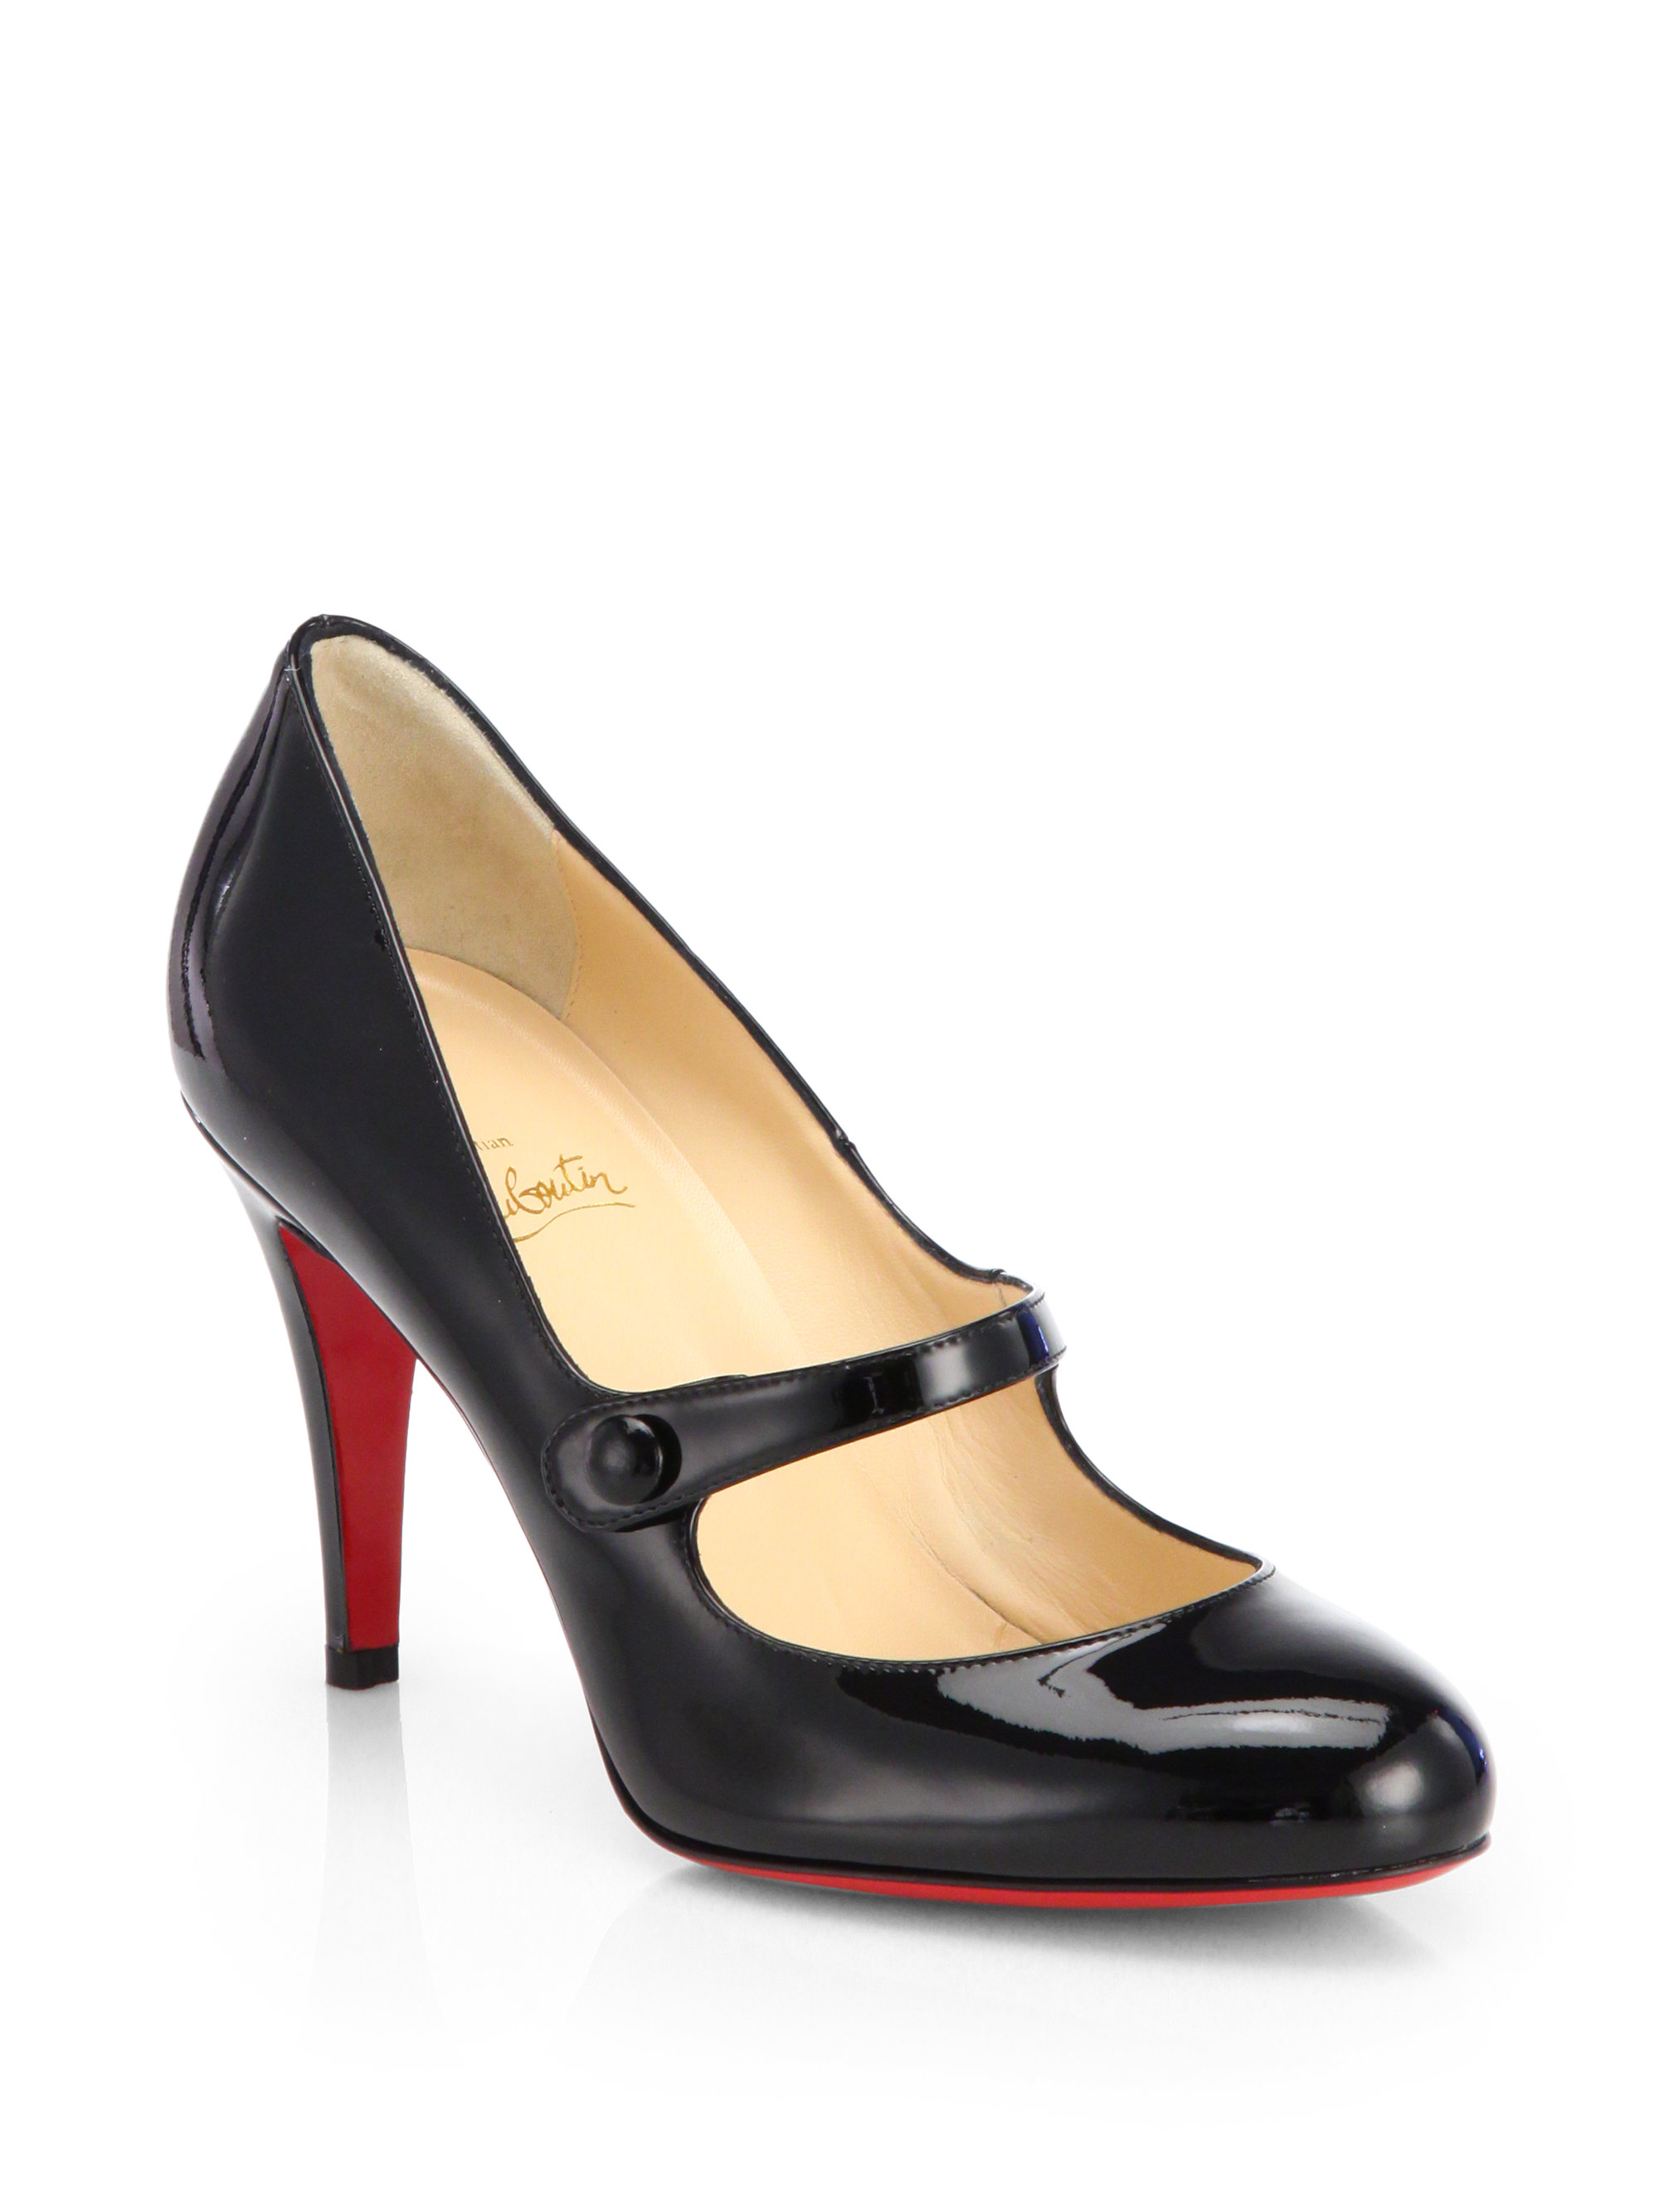 Christian Louboutin Charlene Patent Leather Mary Jane Pumps in Black | Lyst